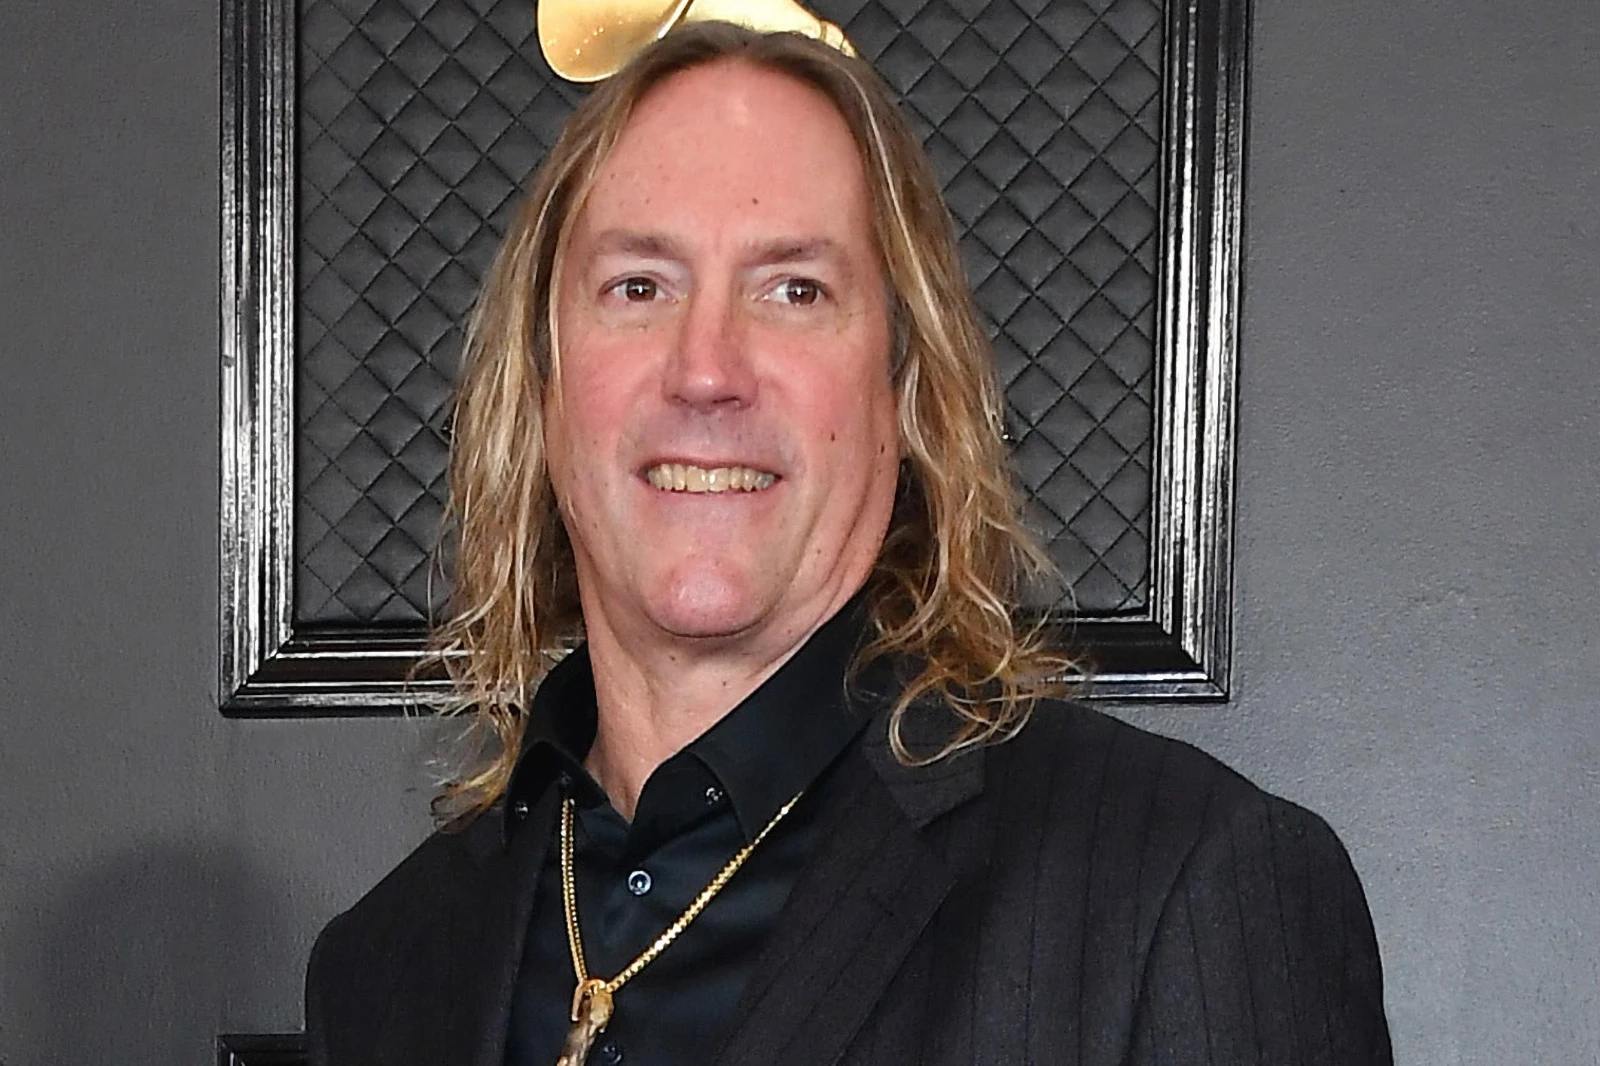 Tool's Danny Carey Won't Face Airport Assault Charges